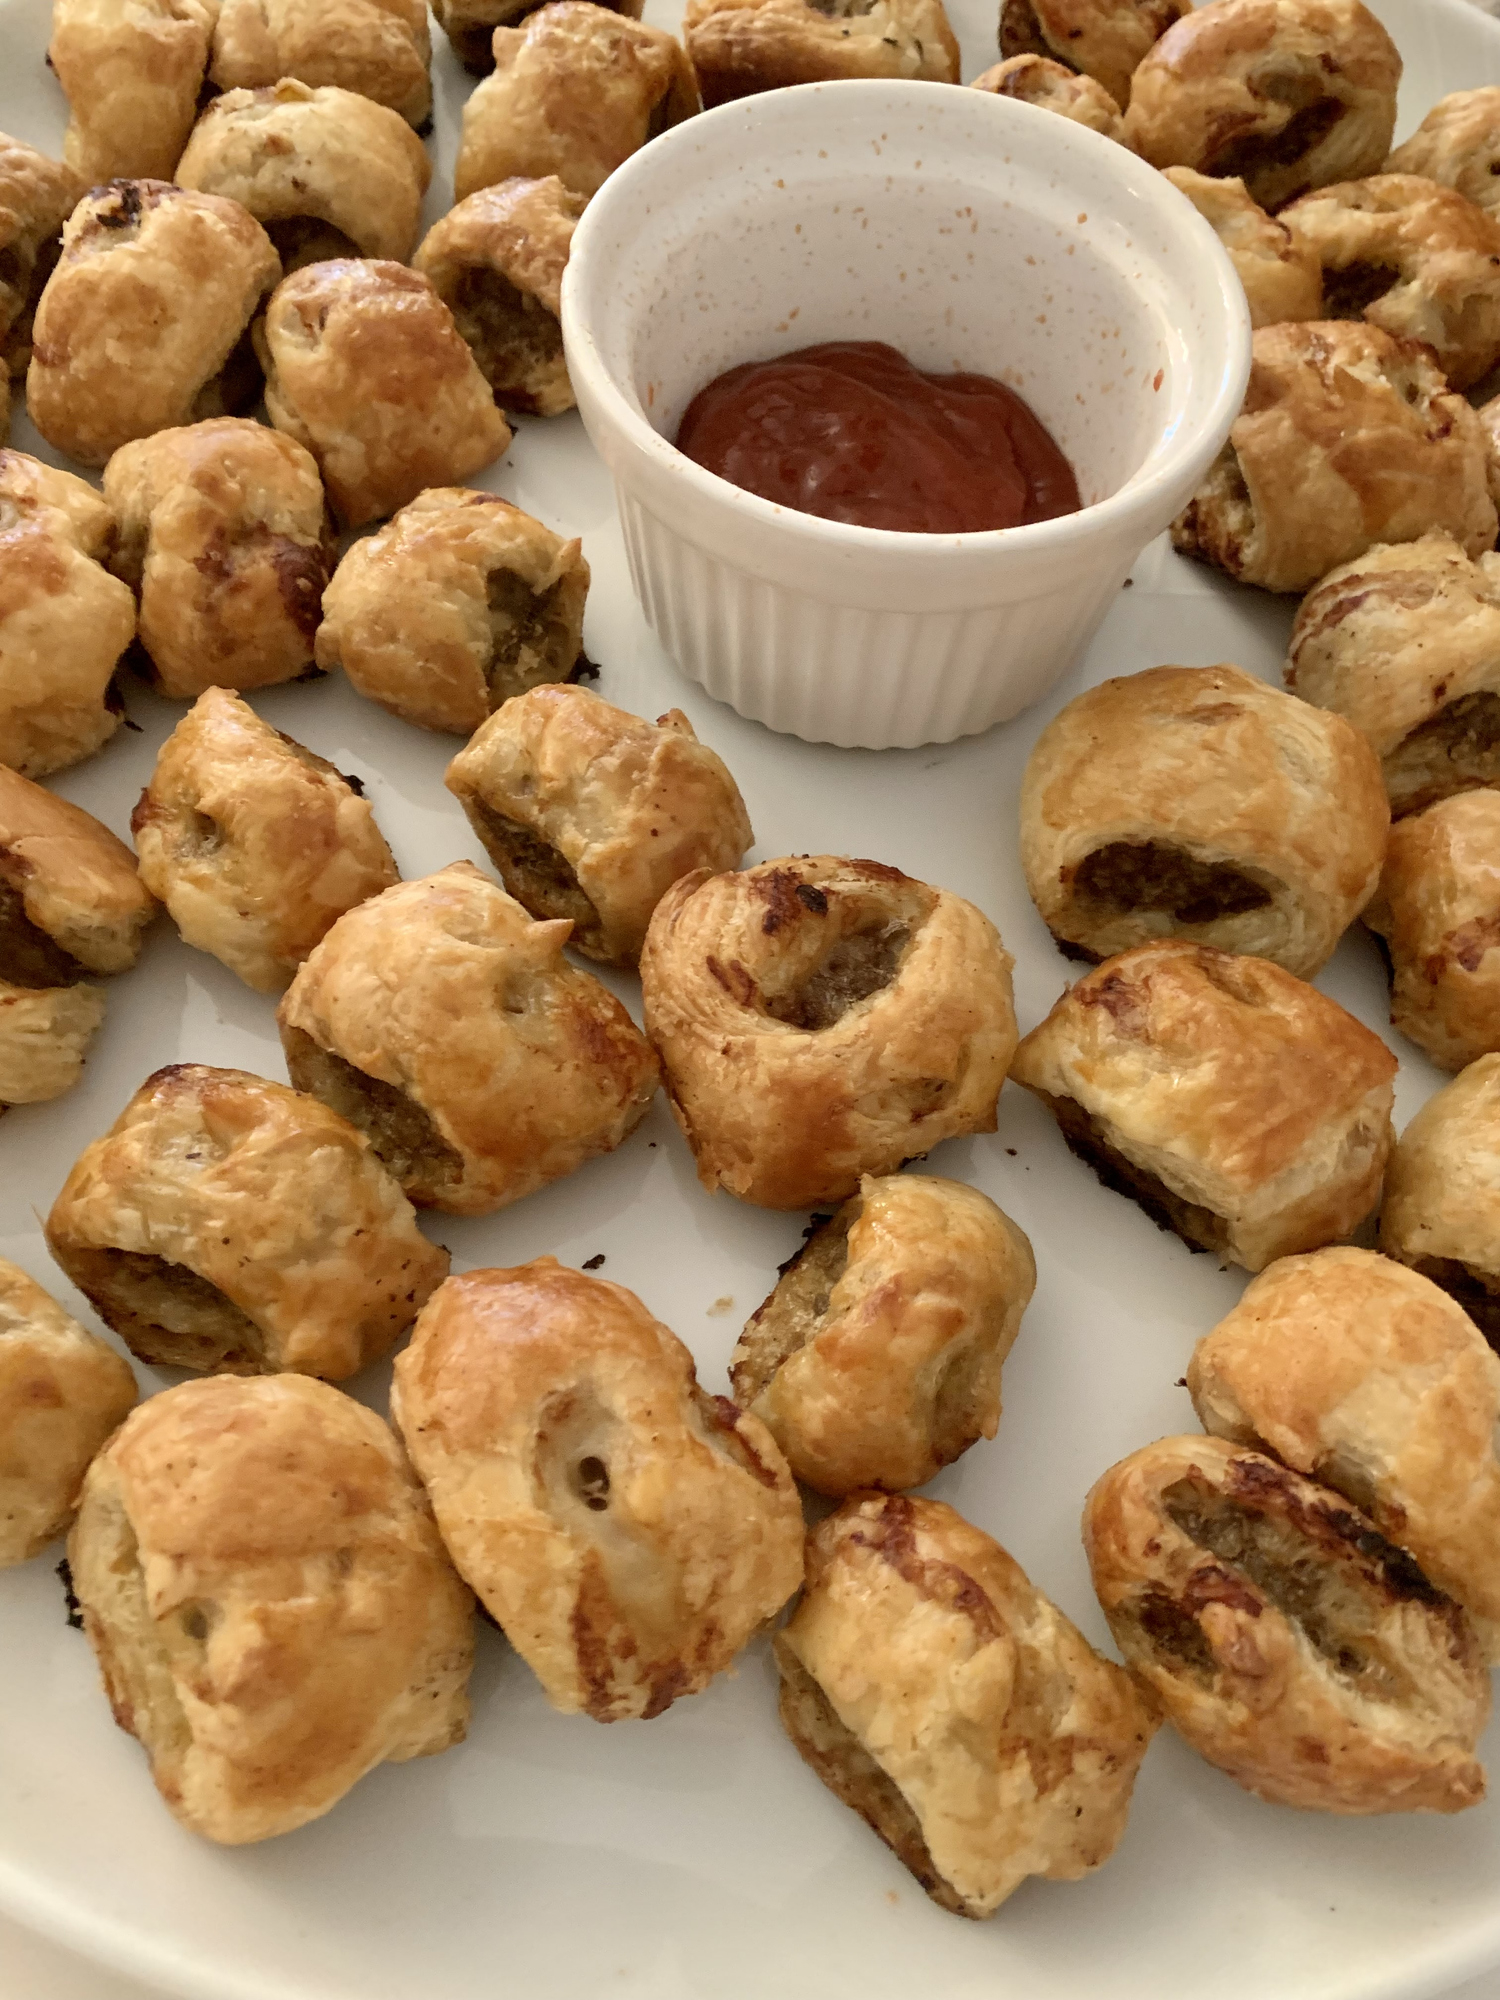 A platter of sausage rolls with a bowl of dipping sauce in the center